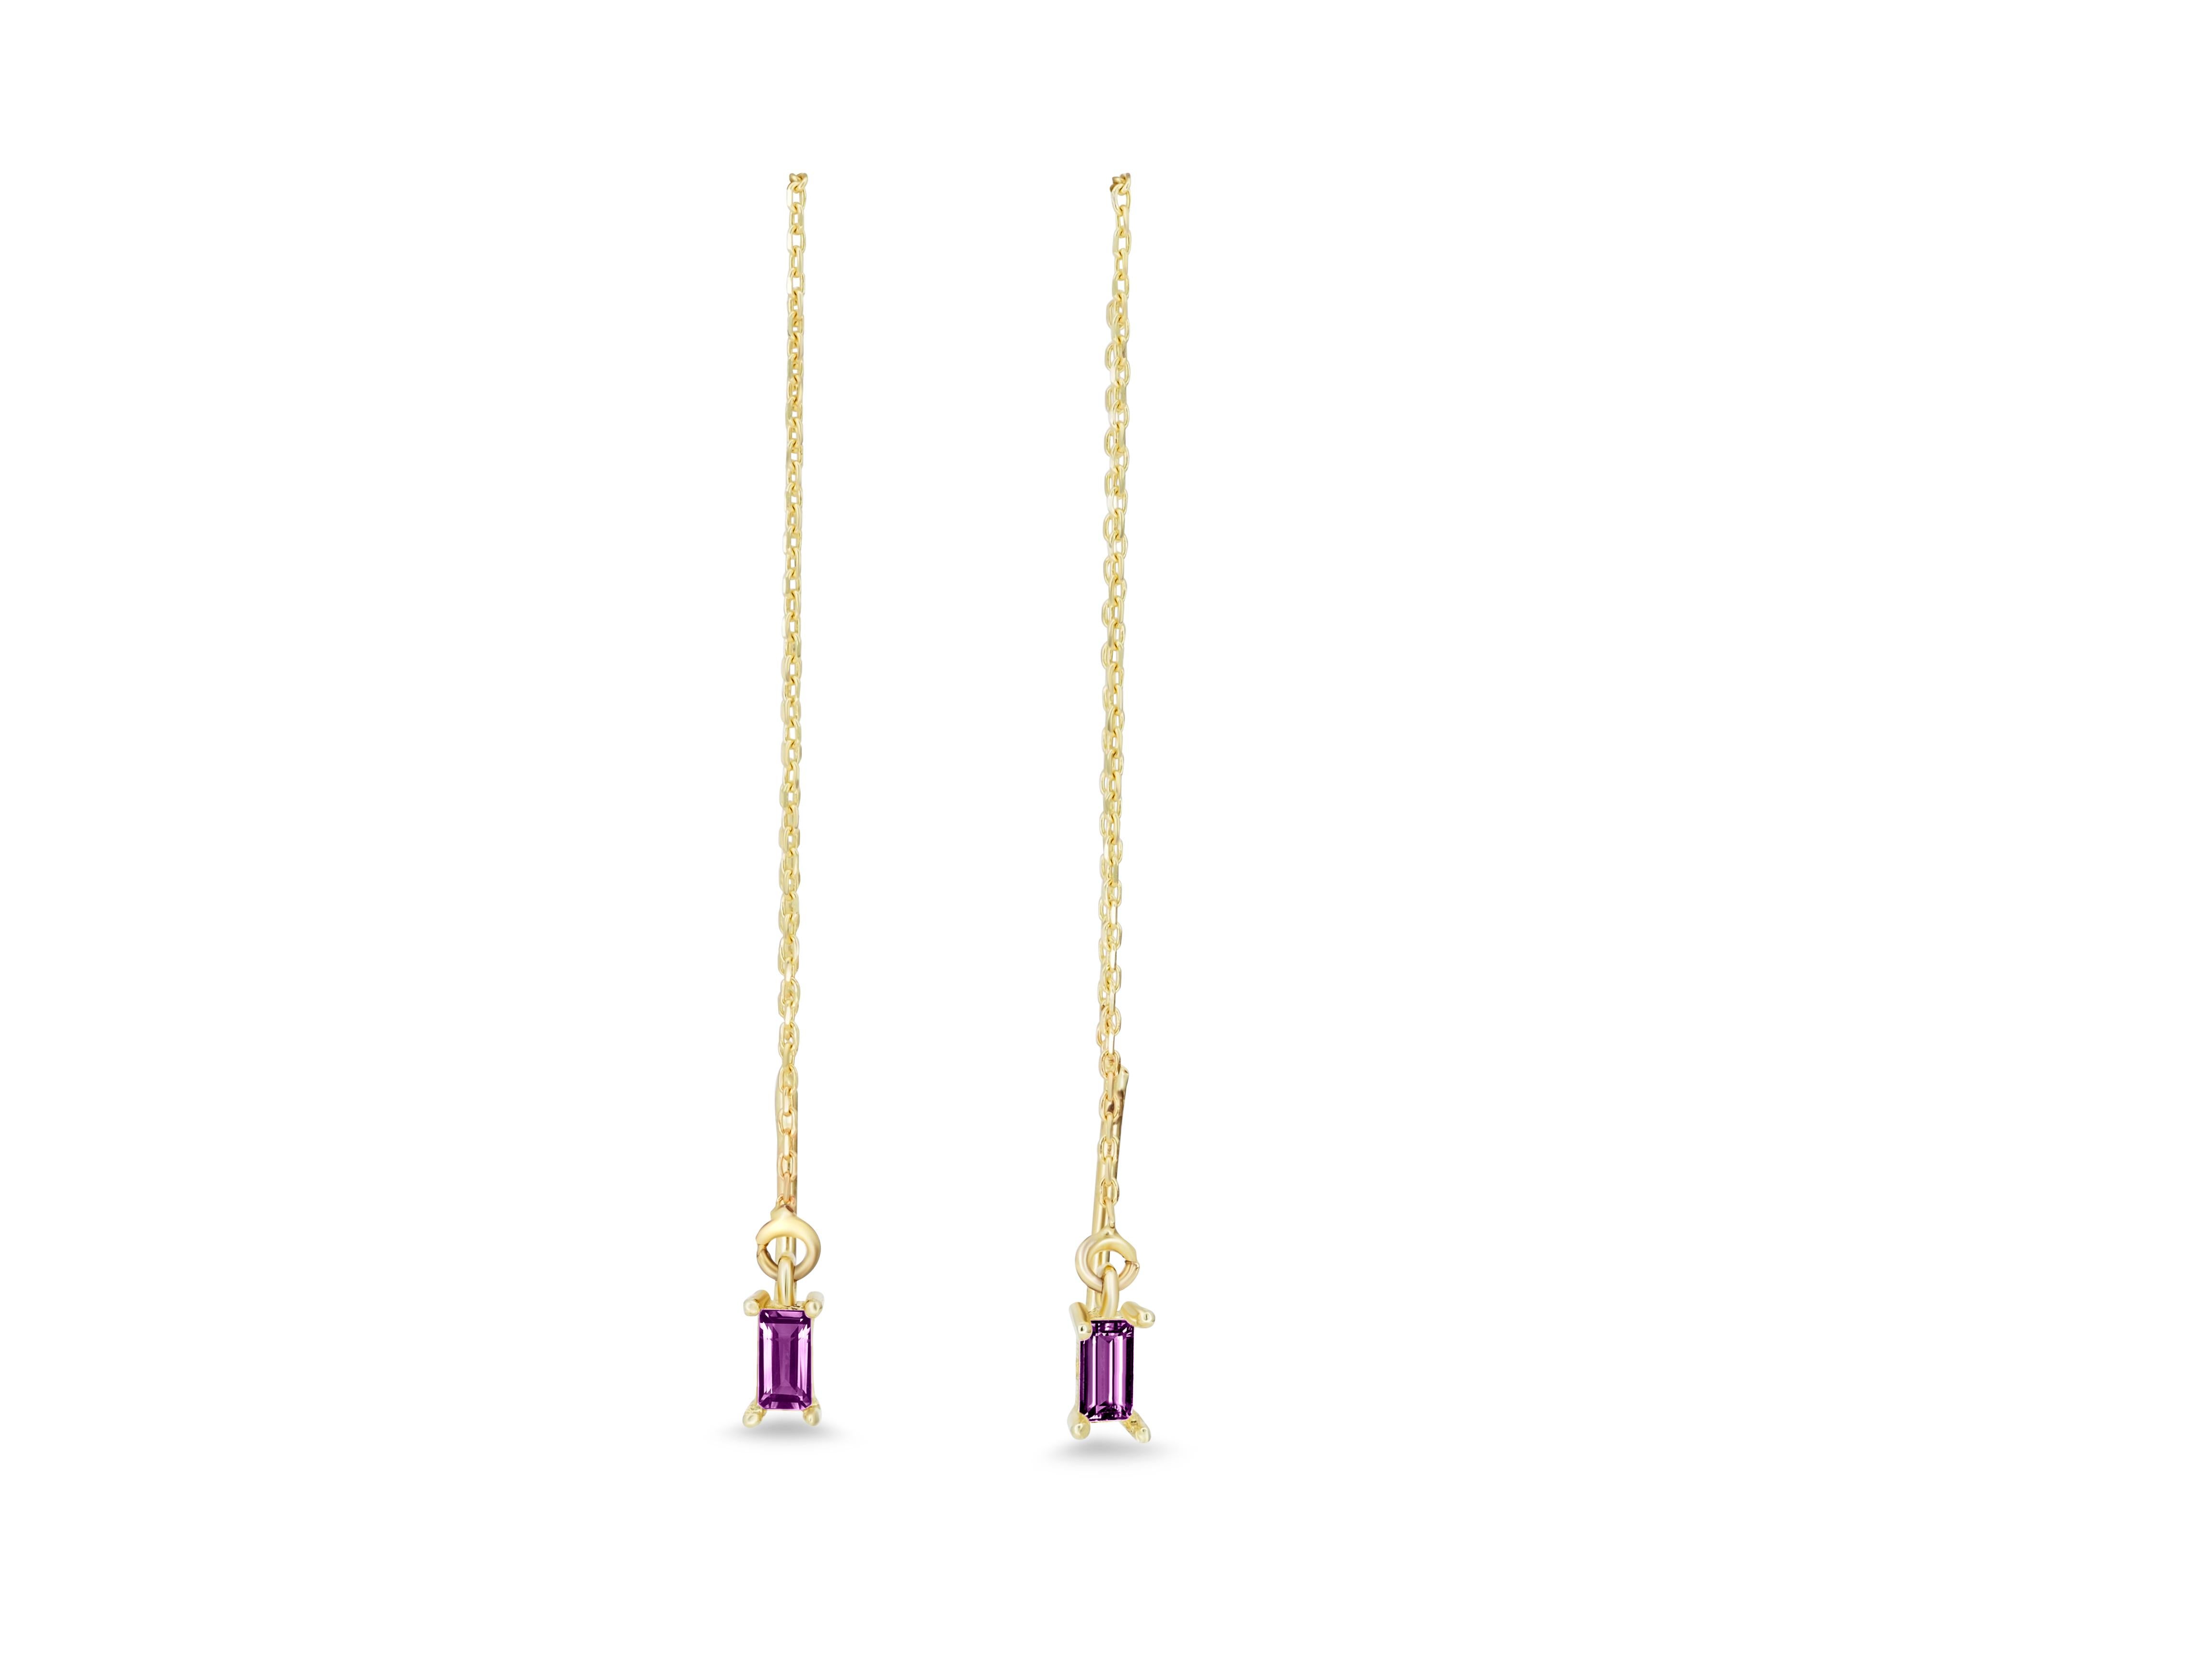 Baguette Cut 14k Solid Gold Drop Earrings with amethyst.  For Sale